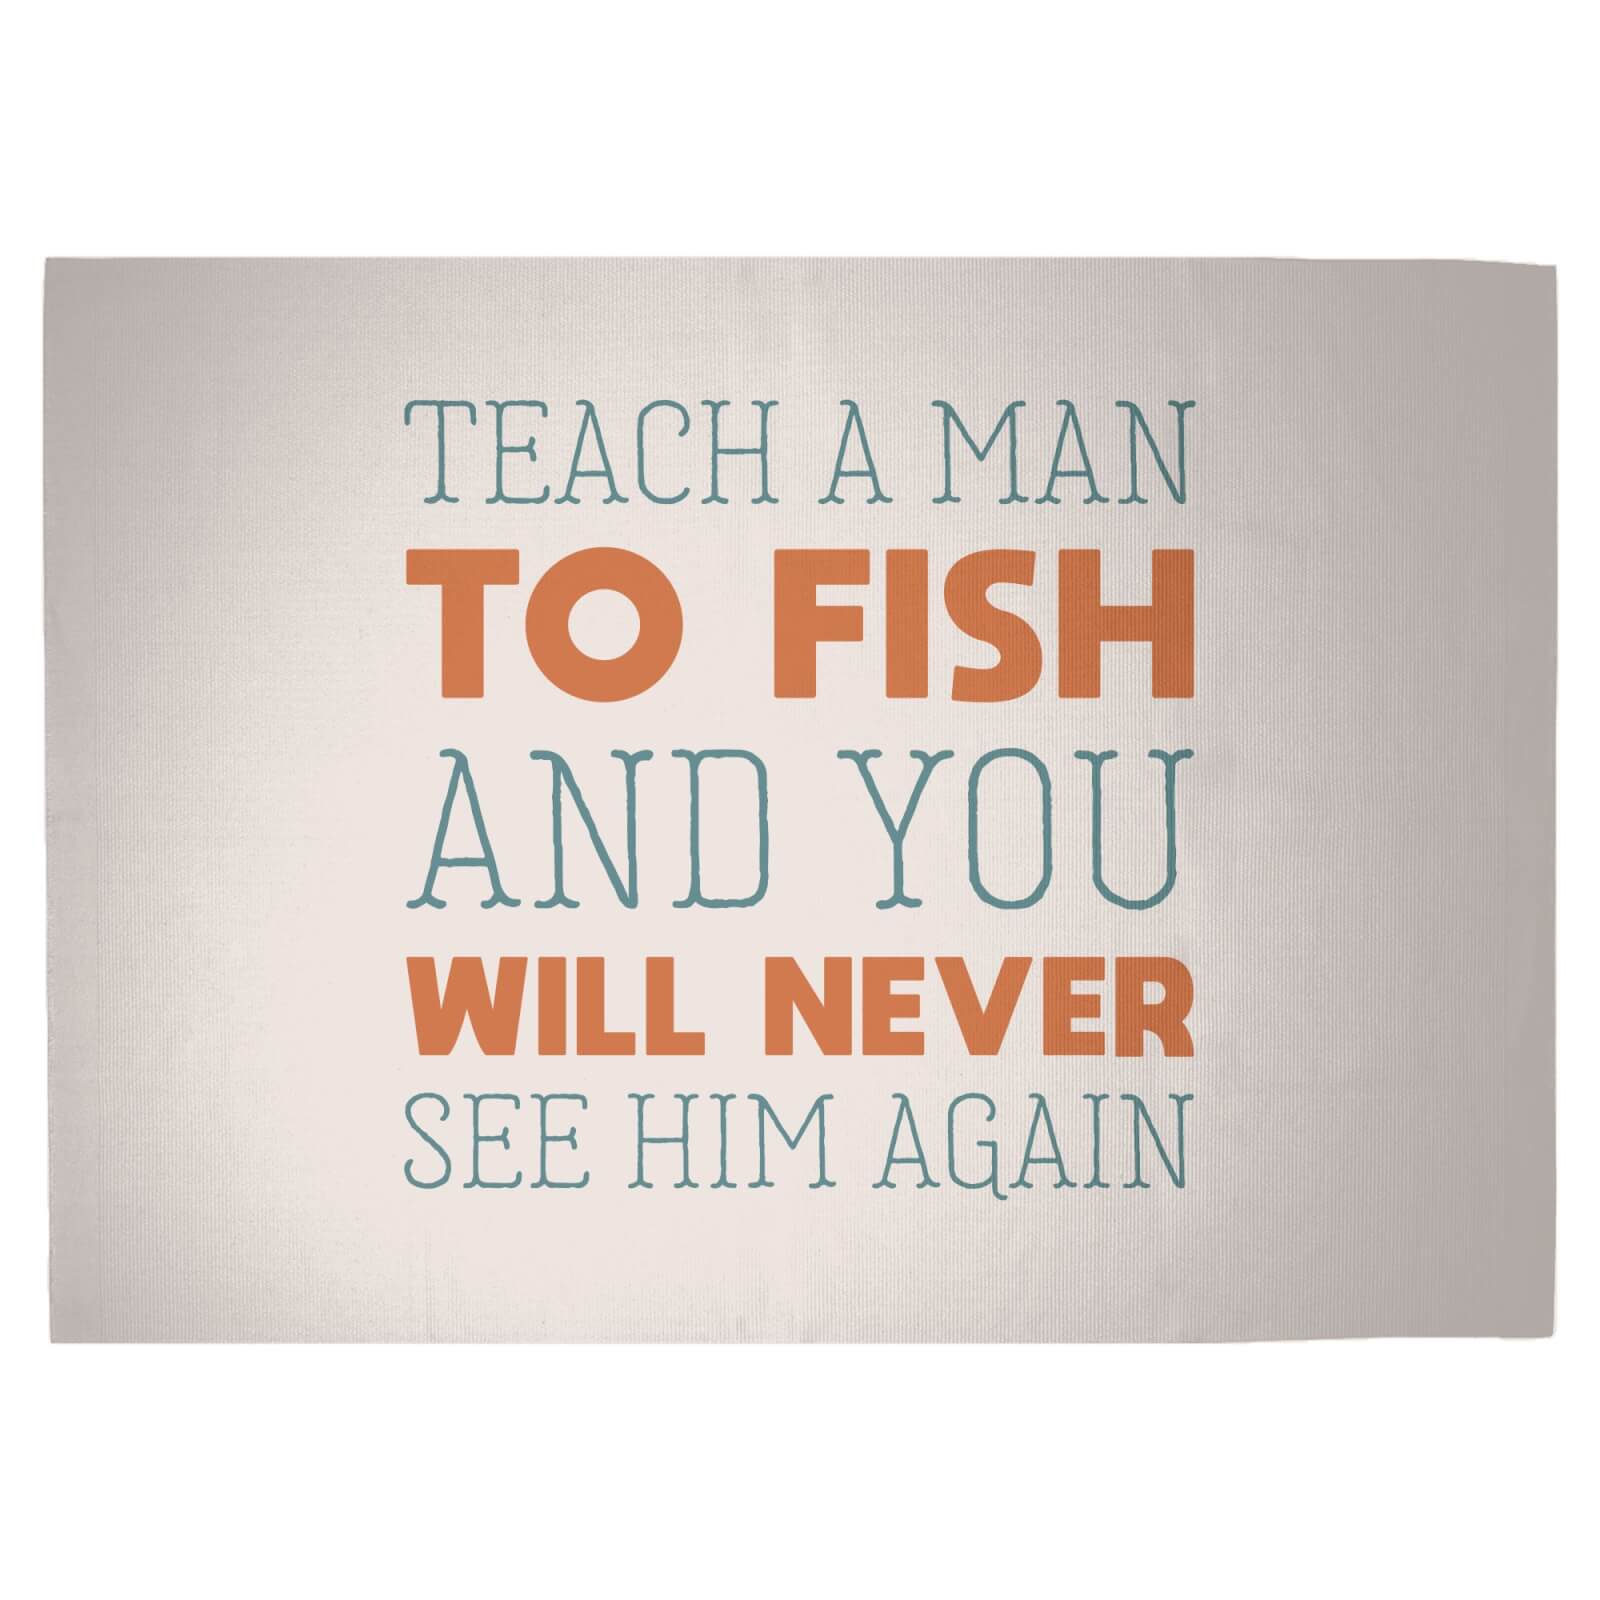 Teach A Man To Fish And You Will Never See Him Again Woven Rug - Large